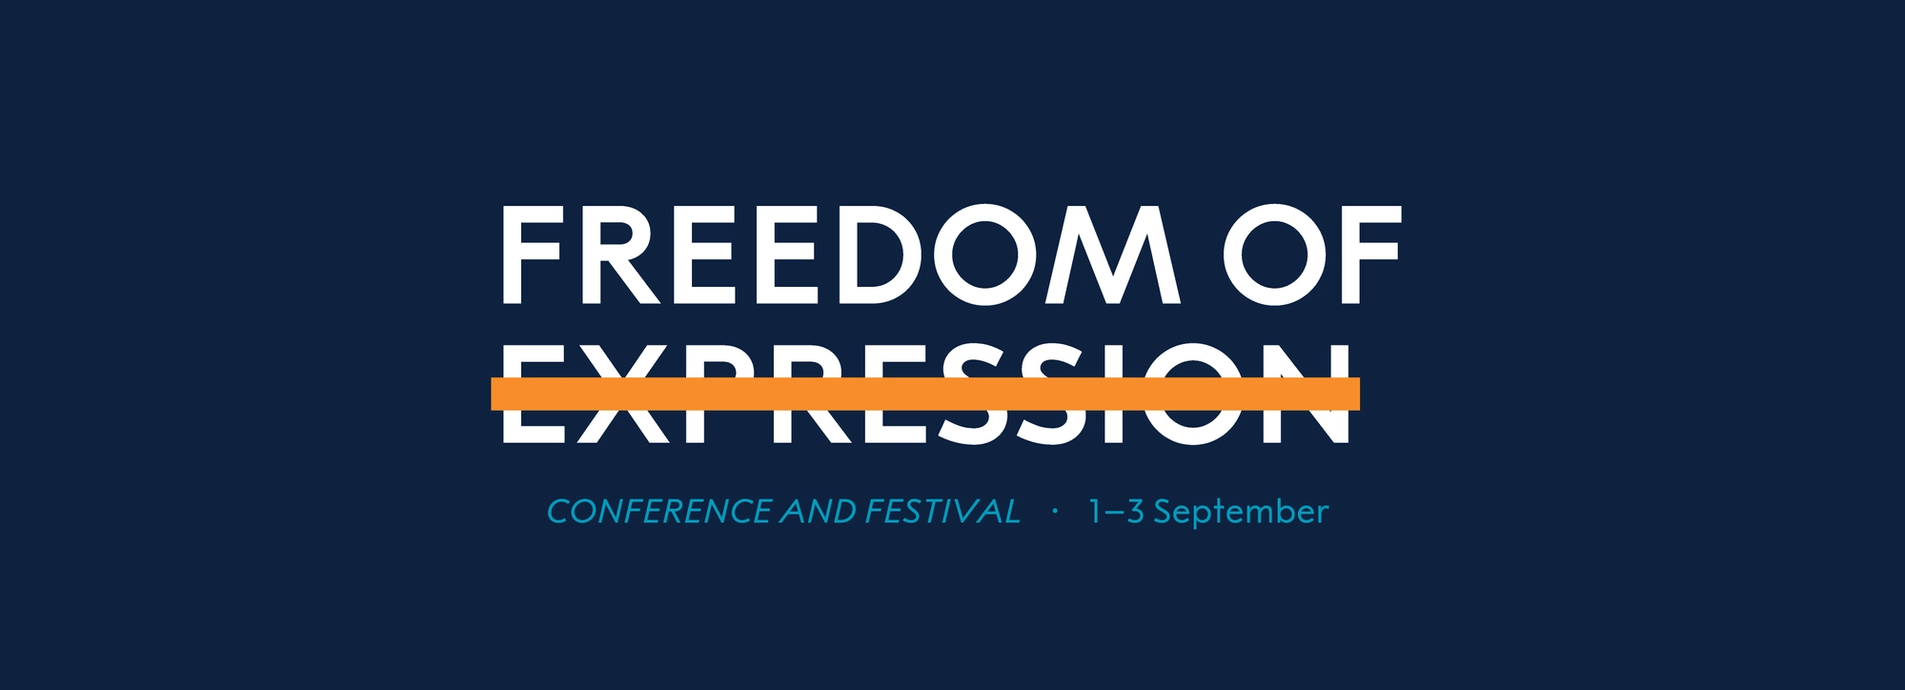 banner freedom of expression